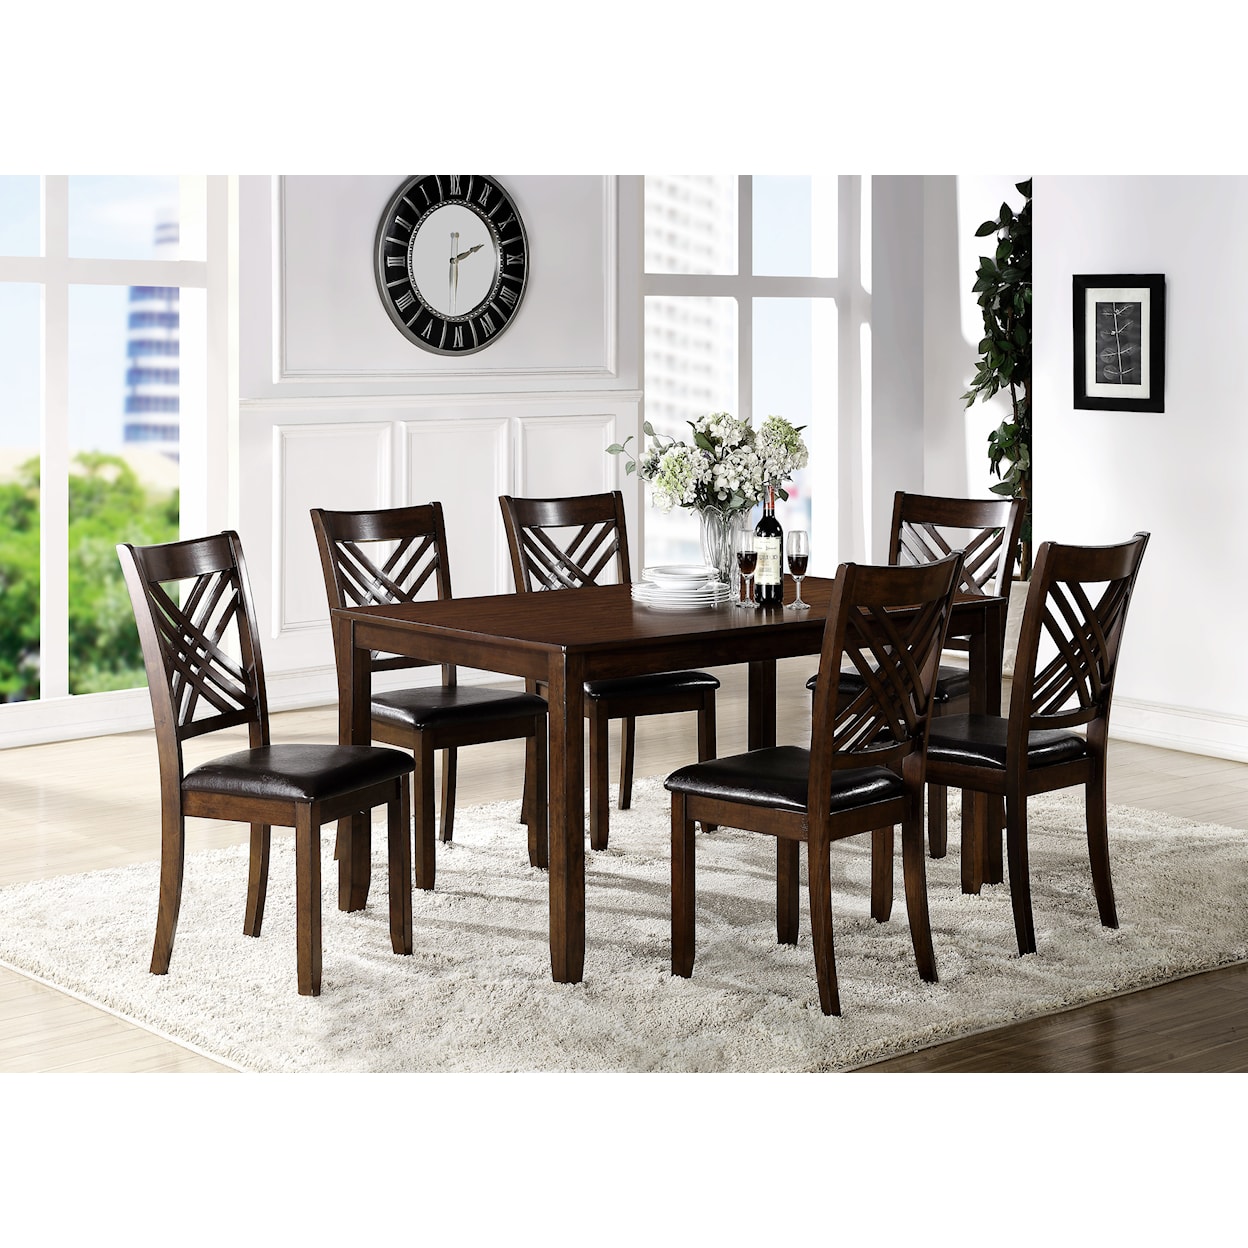 Crown Mark Eloise Dining Room Table with Six Side Chairs